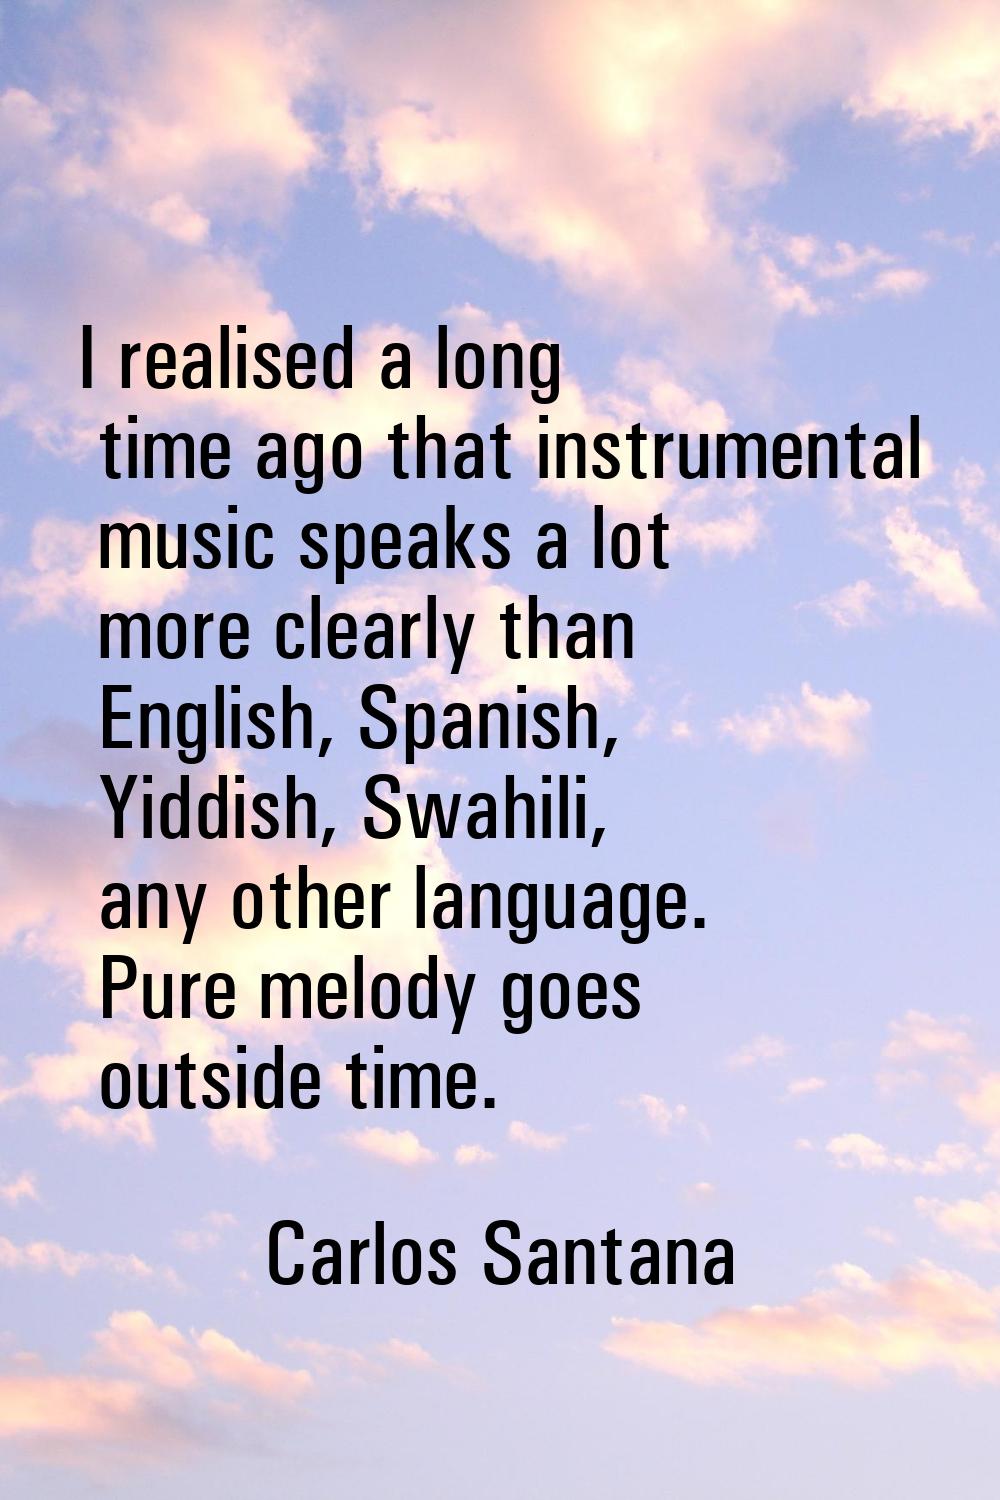 I realised a long time ago that instrumental music speaks a lot more clearly than English, Spanish,